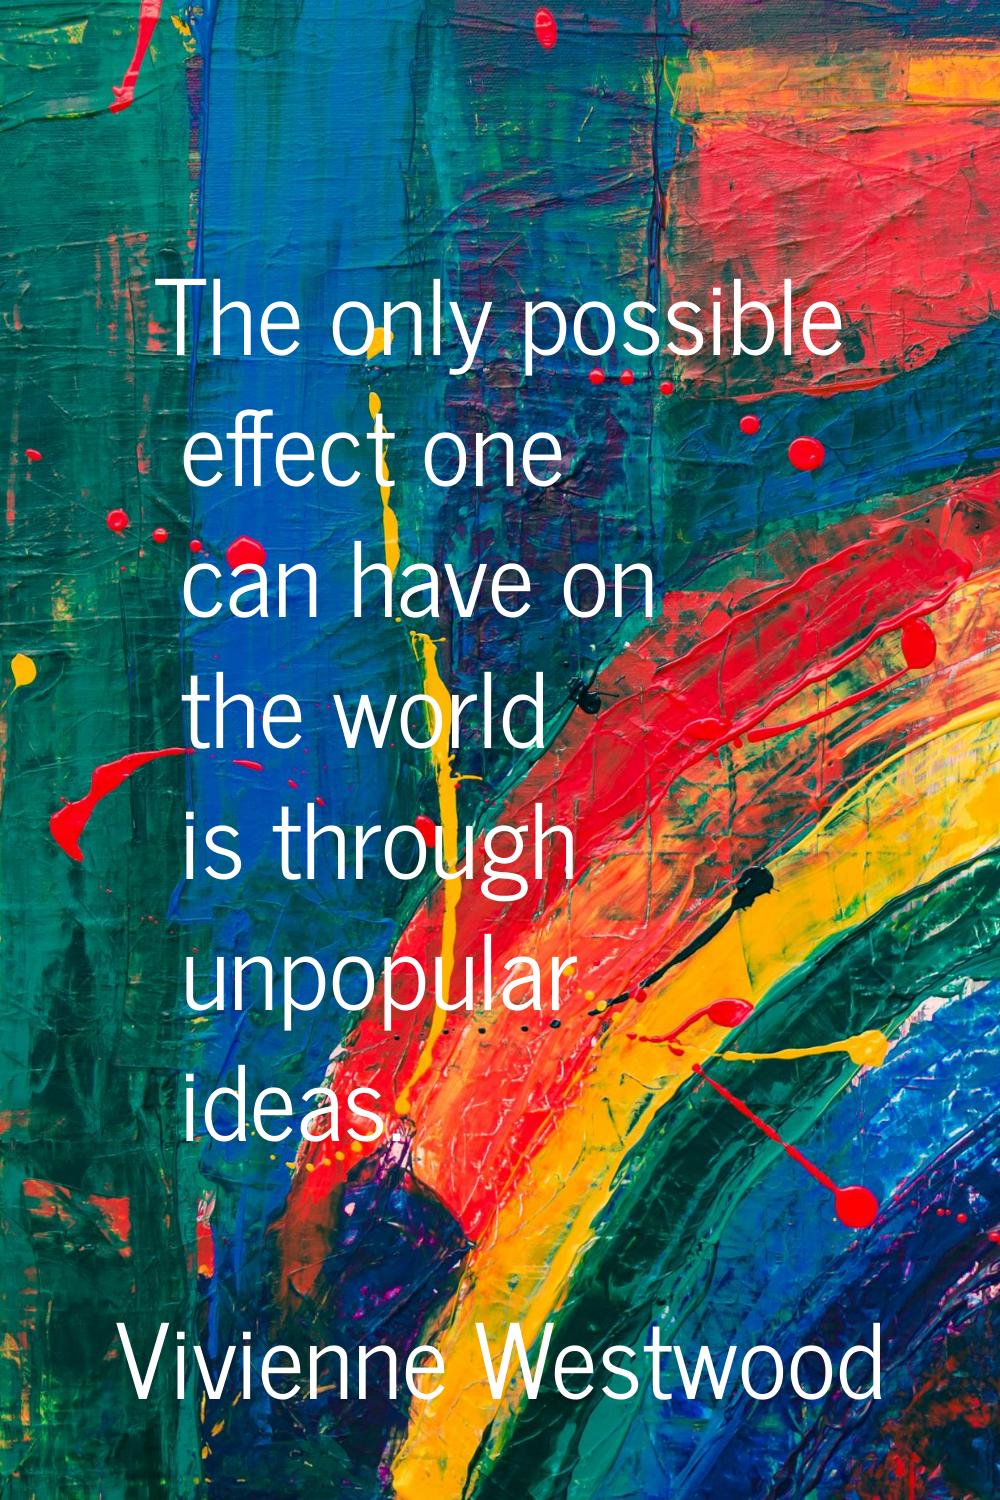 The only possible effect one can have on the world is through unpopular ideas.